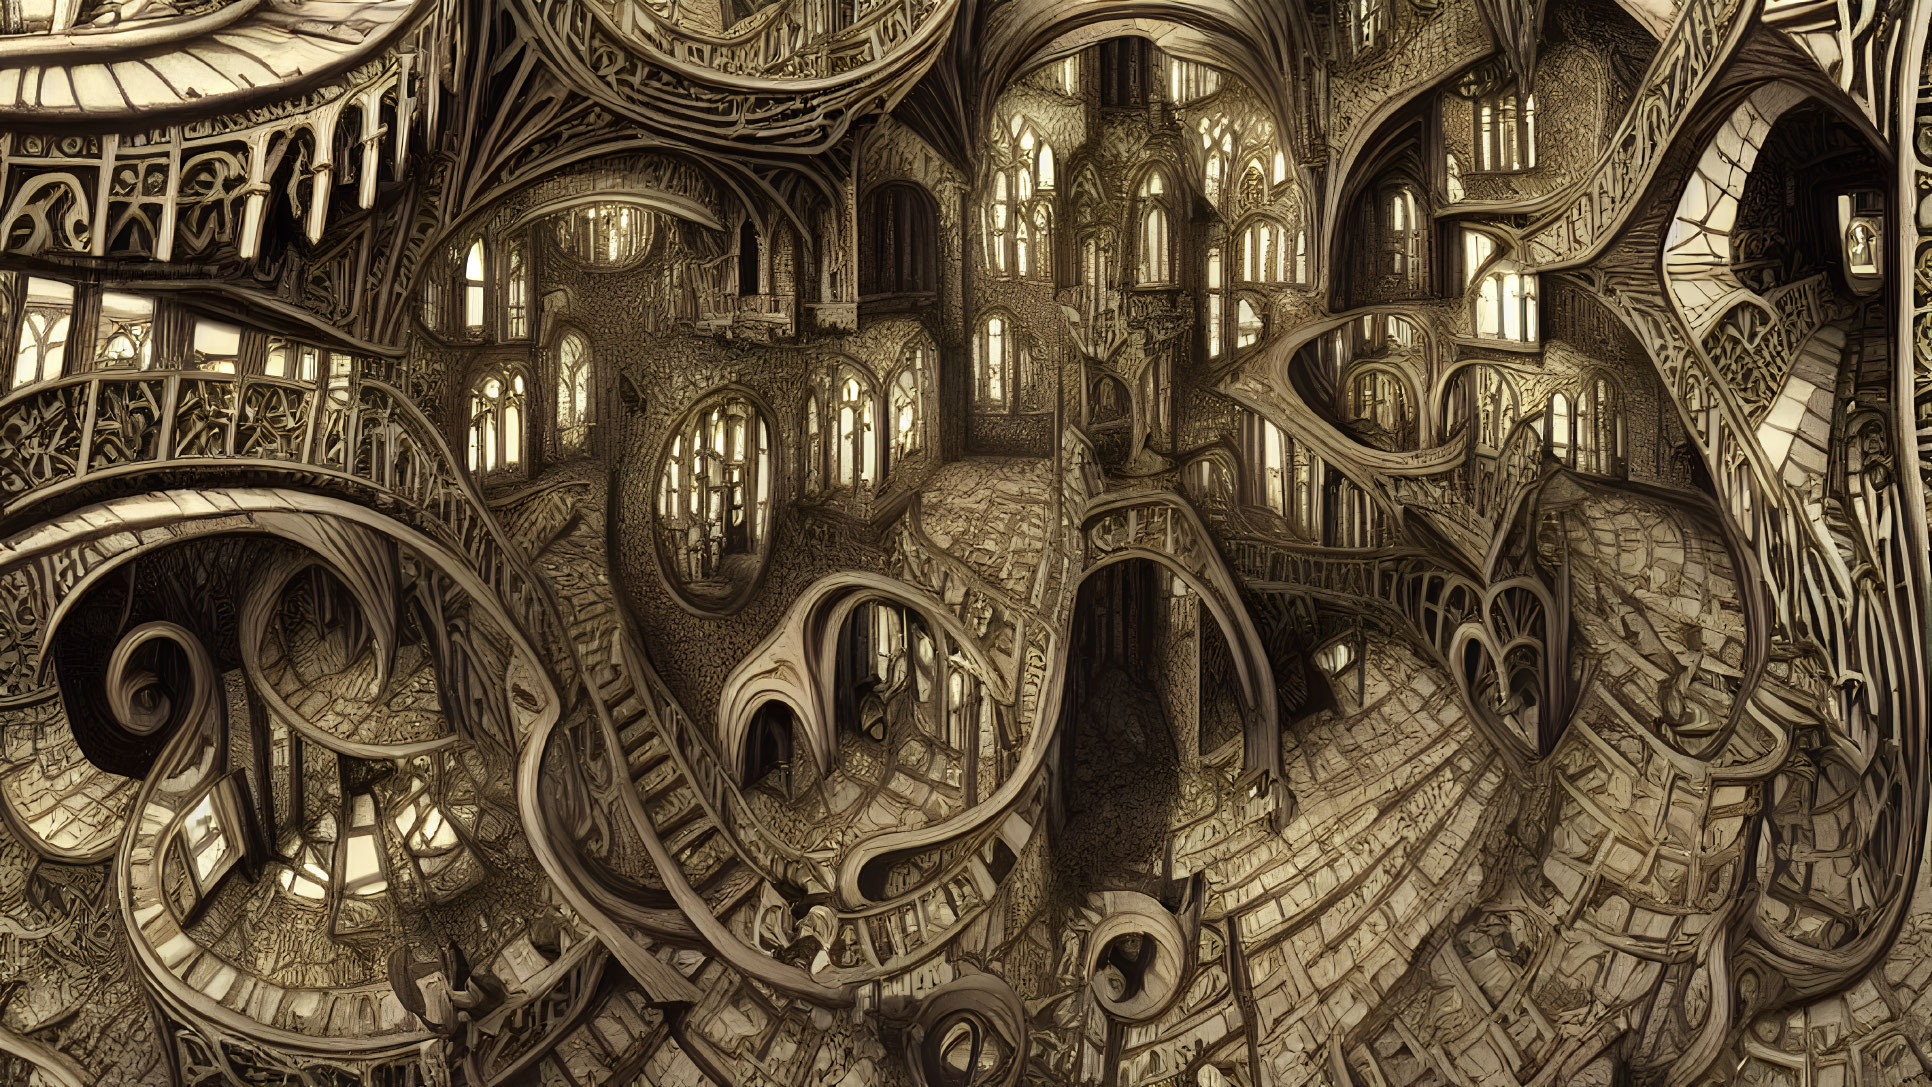 Detailed surreal architectural illustration with winding staircases and arches in sepia tone